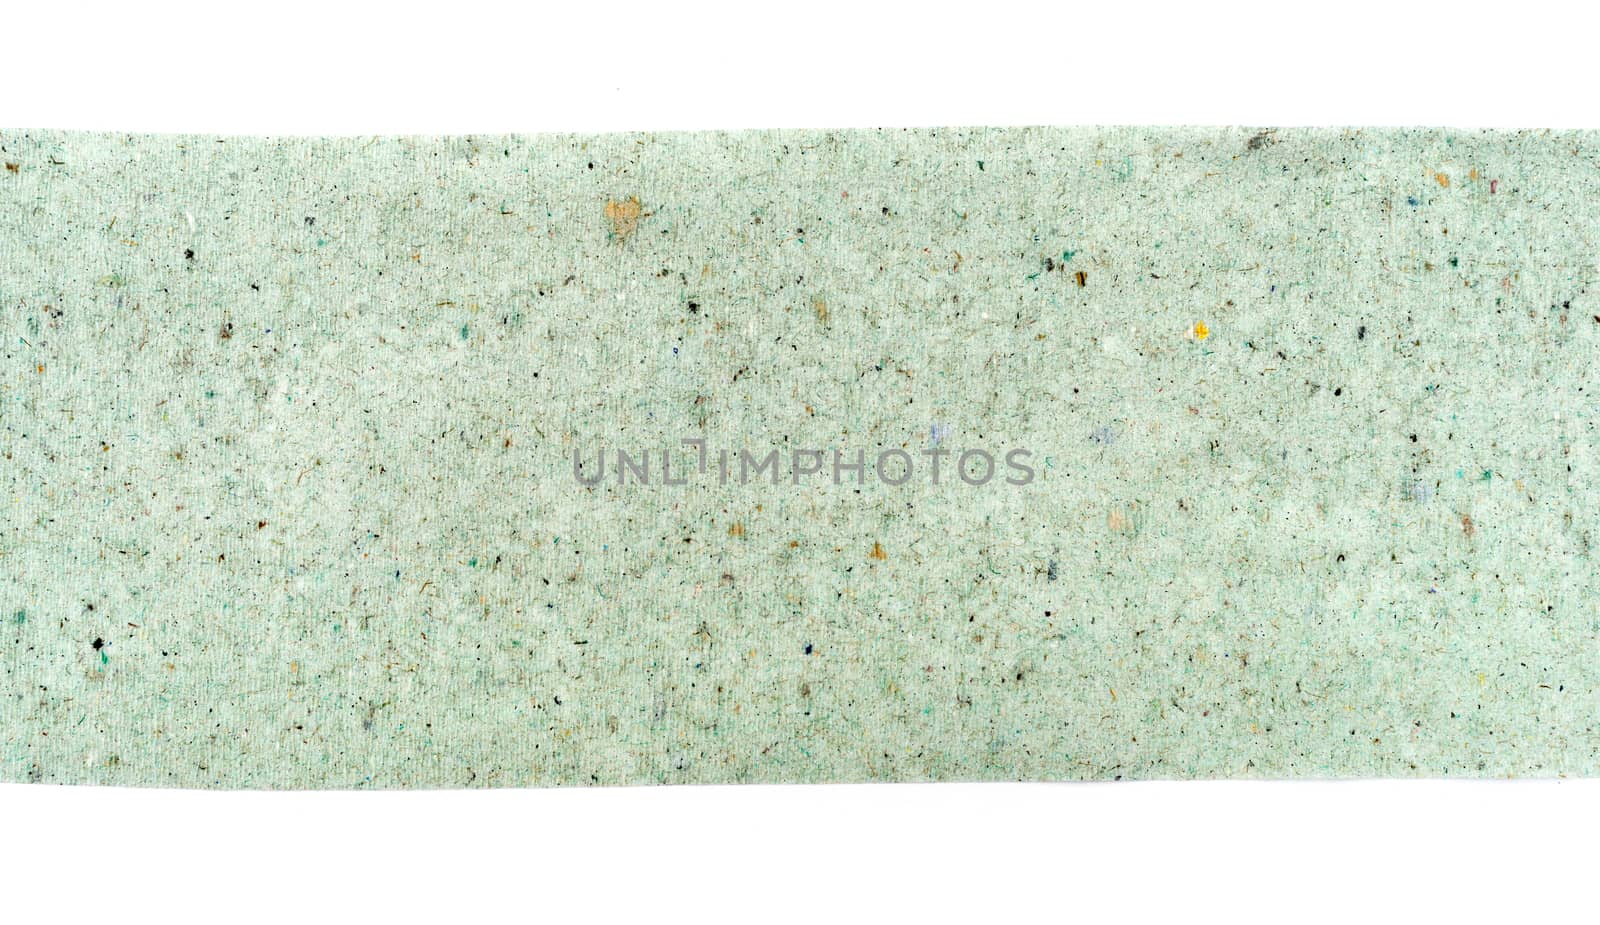 Rough texture of green, toilet paper close up by DNKSTUDIO